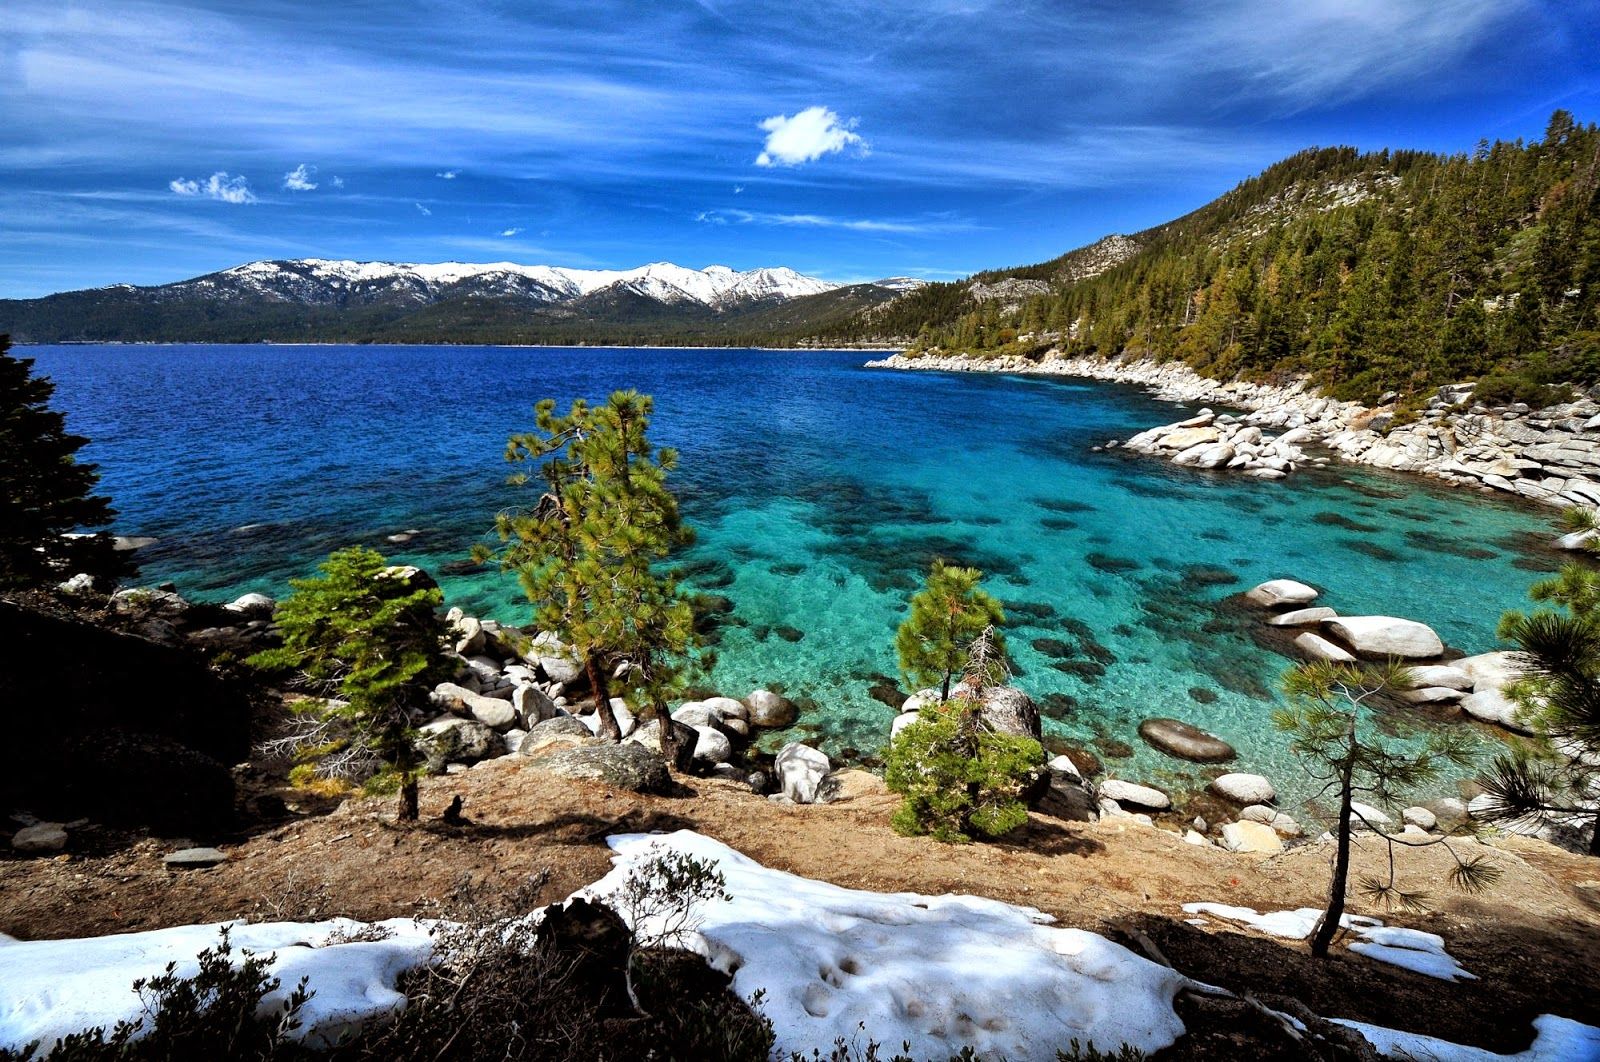 South Lake Tahoe Background. South Asian Wallpaper, South Park Wallpaper and Dirty South Wallpaper